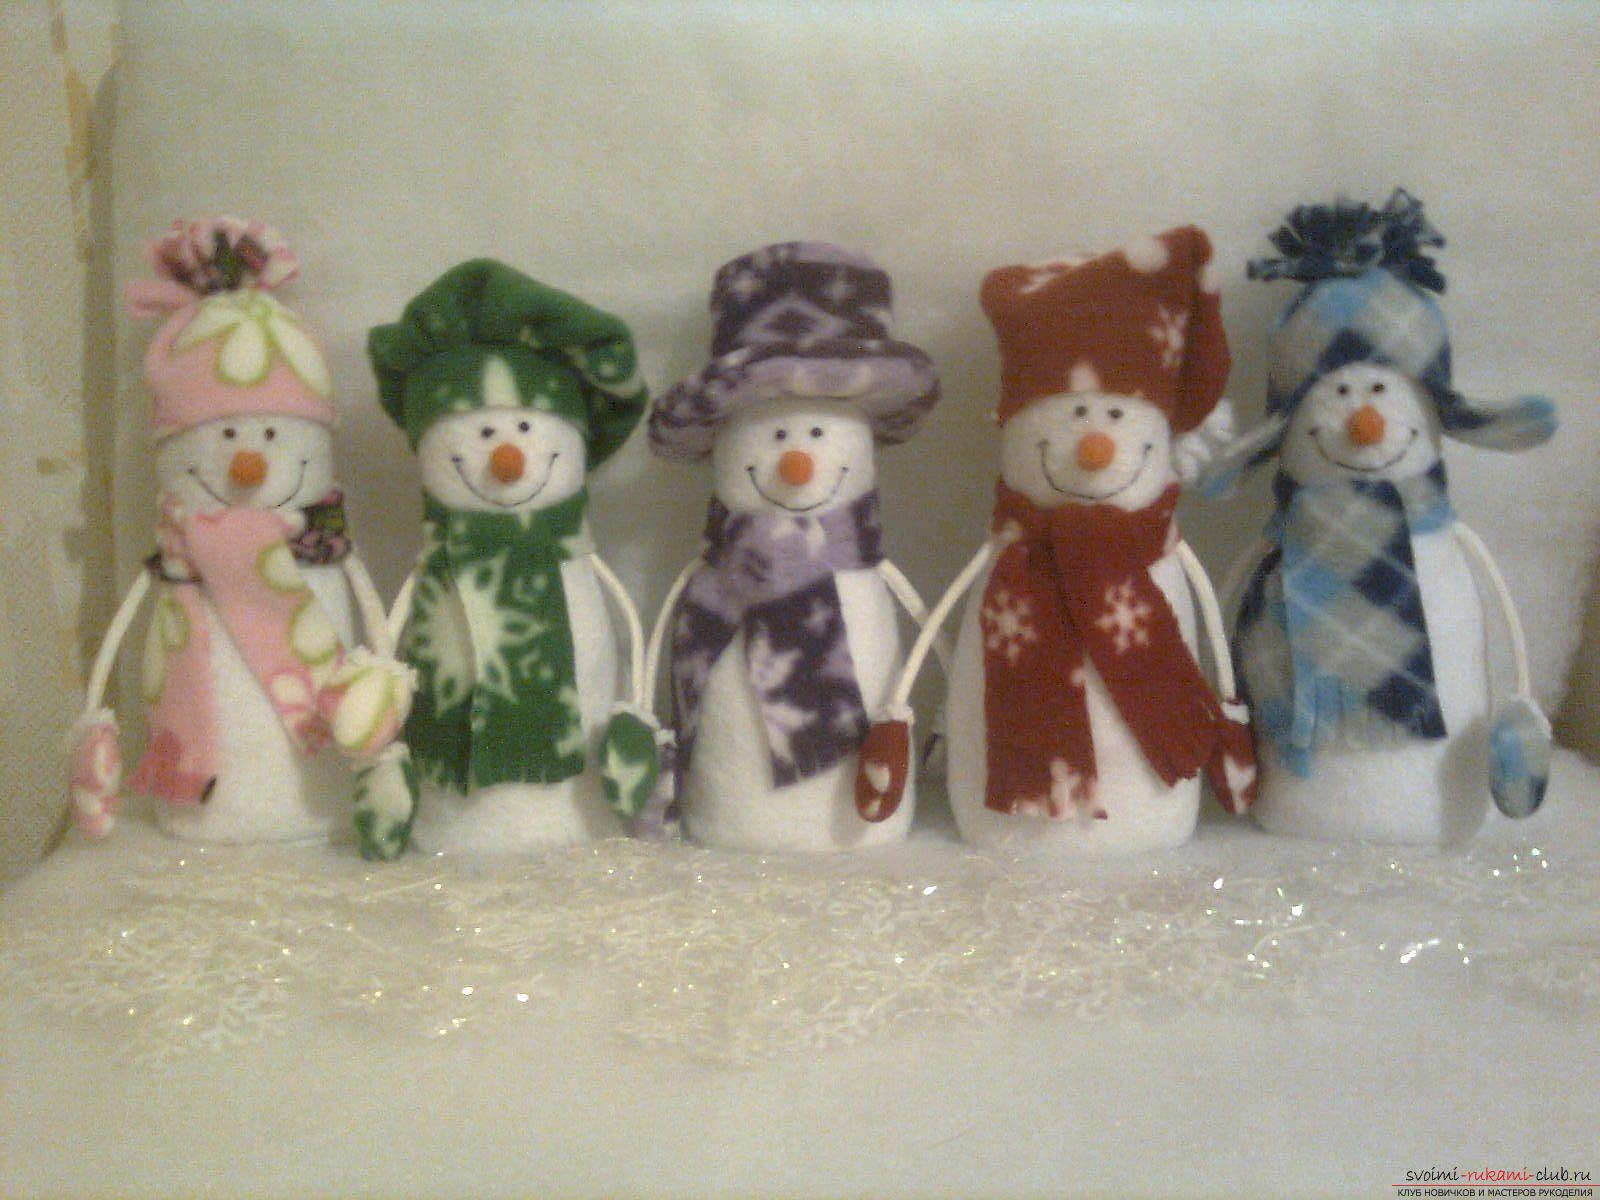 Snowmen made of felt will help create a New Year atmosphere in every home. Hand-craft for the New Year may not be bought in the store, the decoration for the New Year's table can be done by oneself. Picture №1